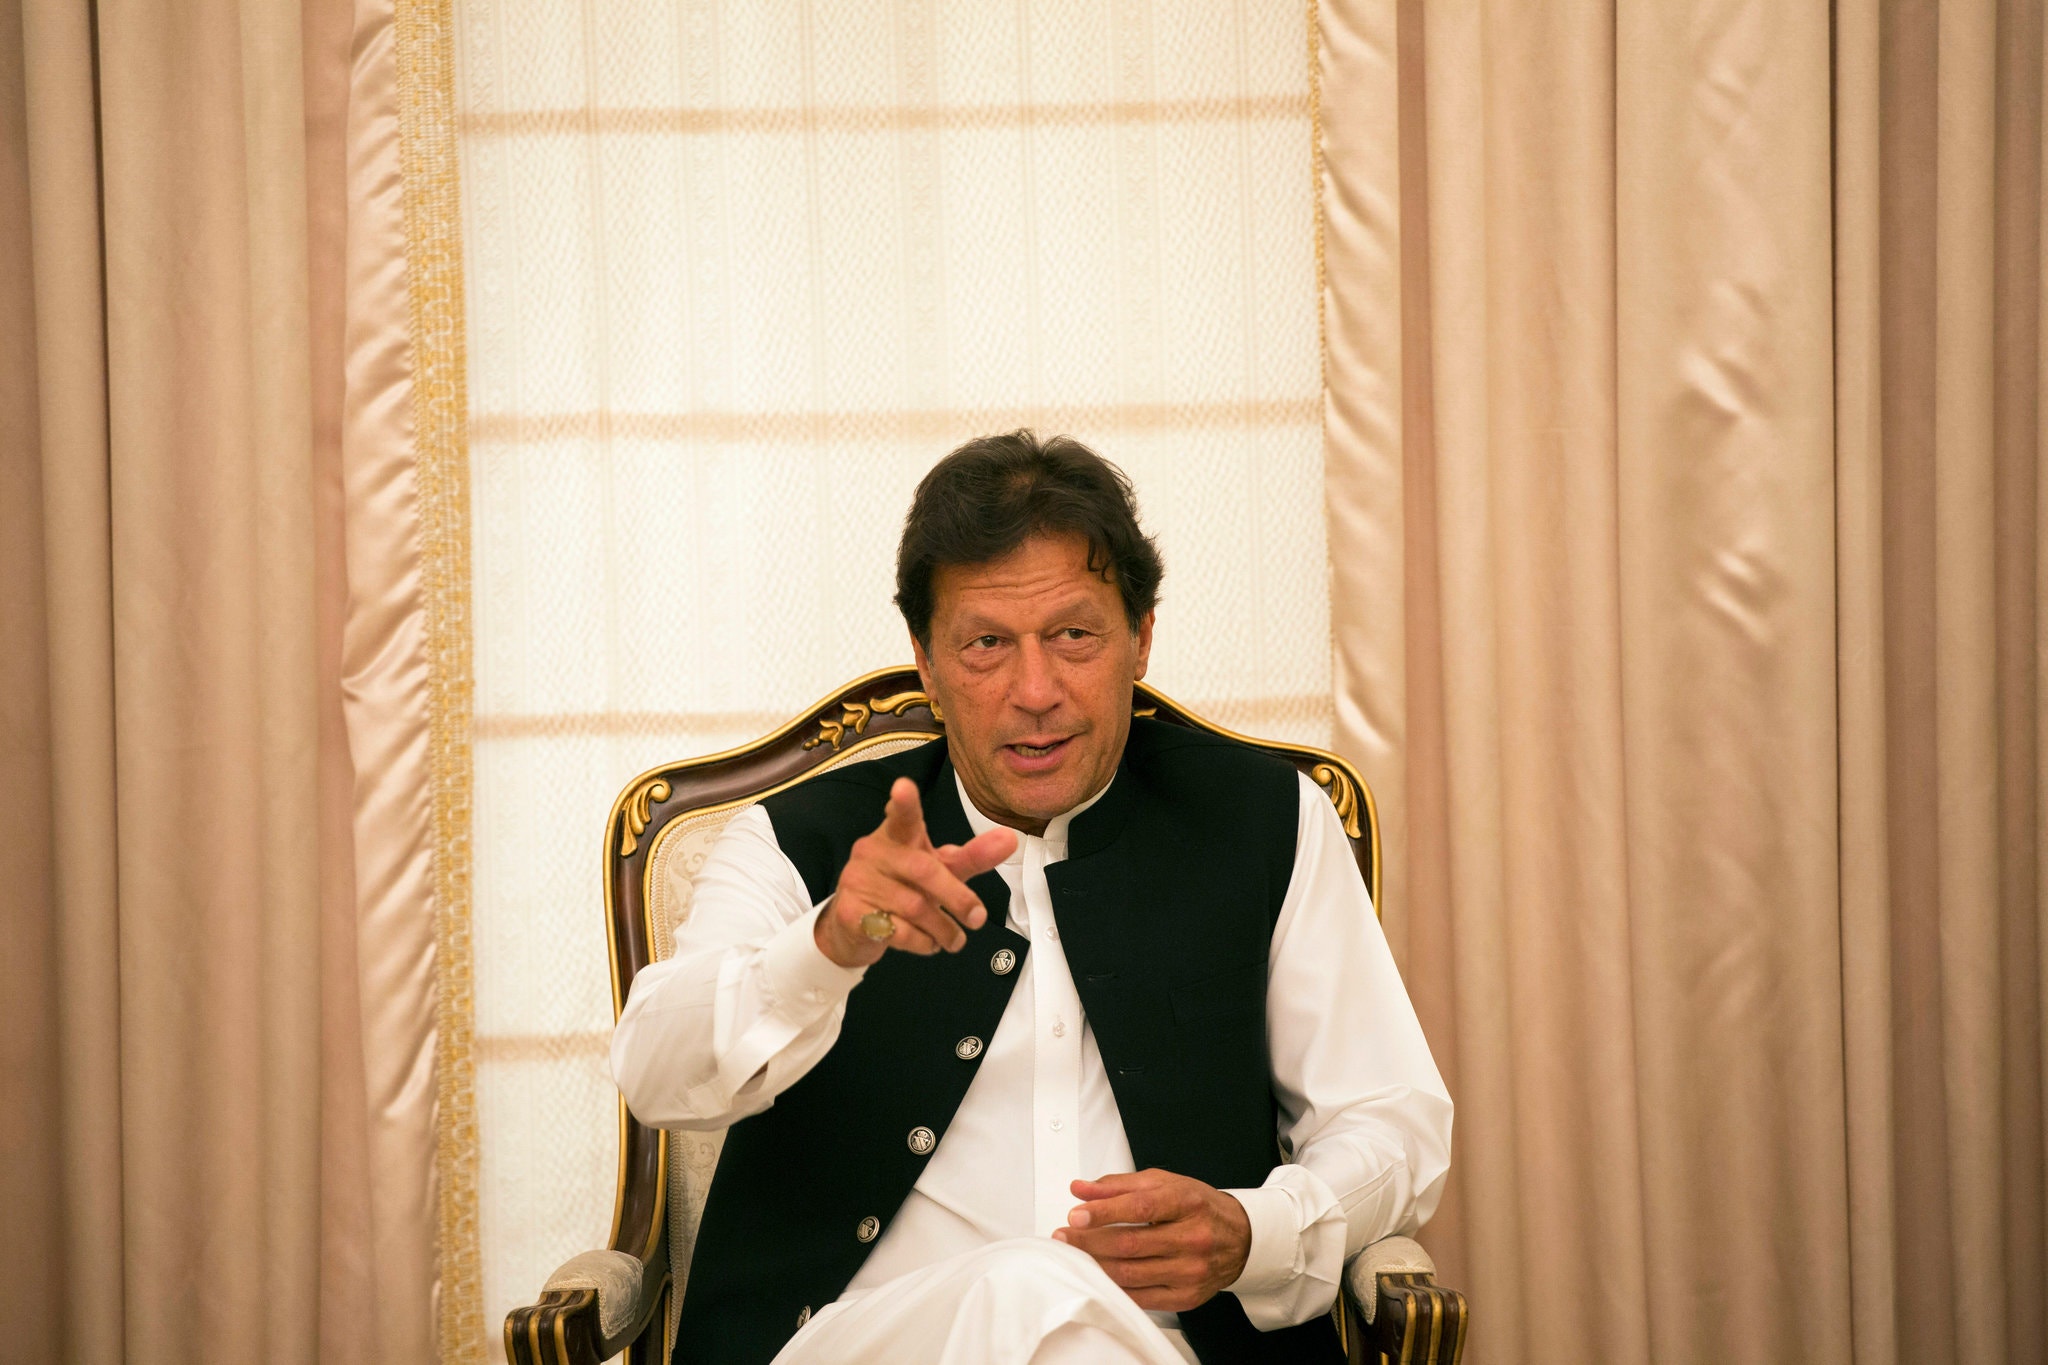 Pakistan Leader Vents Frustration at India: 'No Point in Talking to Them' Prime Minister Imran Khan of Pakistan said he warned President Trump of a “potentially very explosive situation.” Credit: Saiyna Bashir for The New York Times